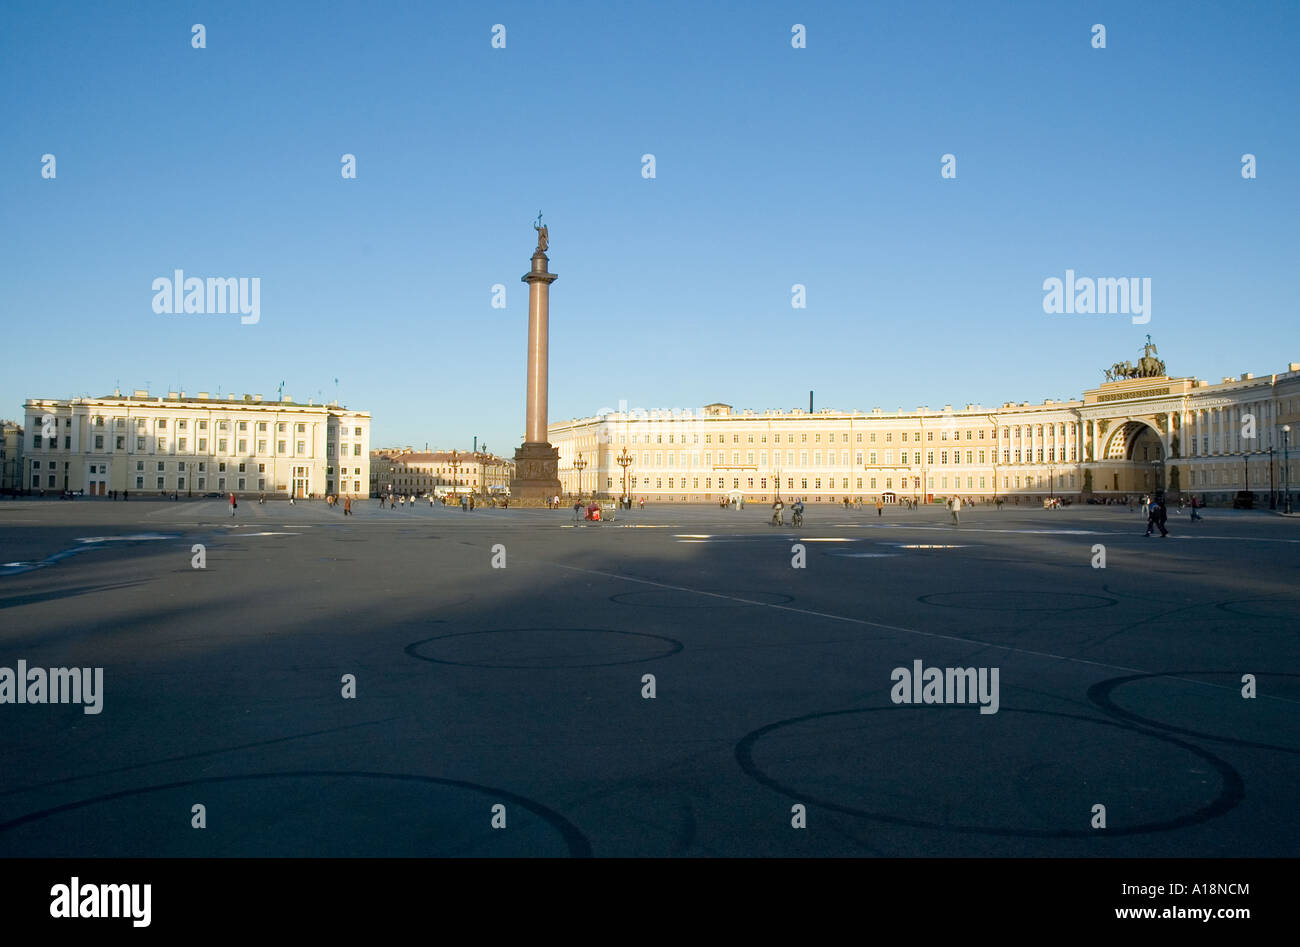 Palace Square in Saint Petersubrg Russia Stock Photo